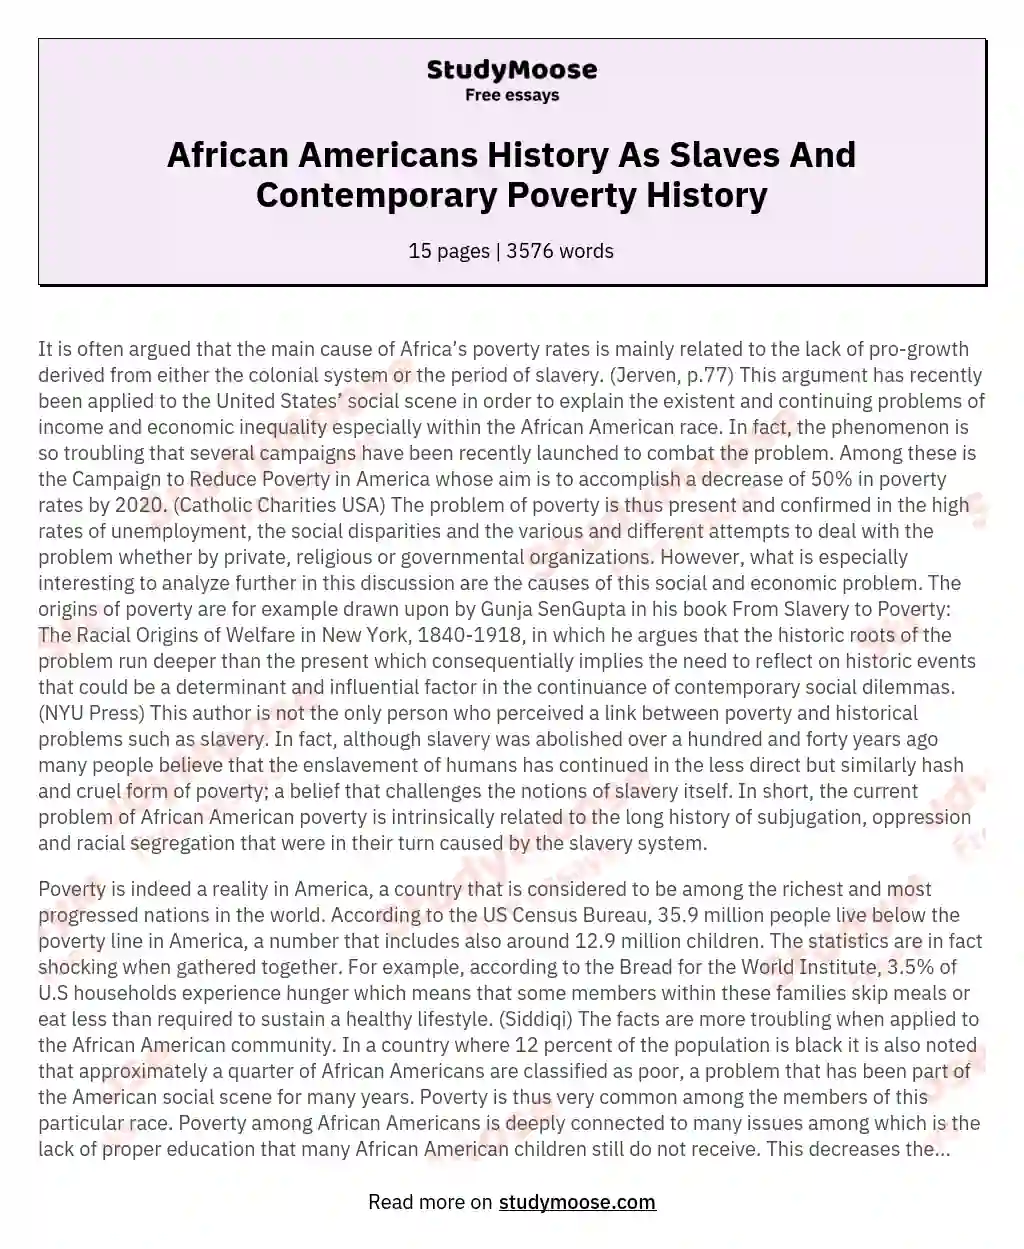 African Americans History As Slaves And Contemporary Poverty History